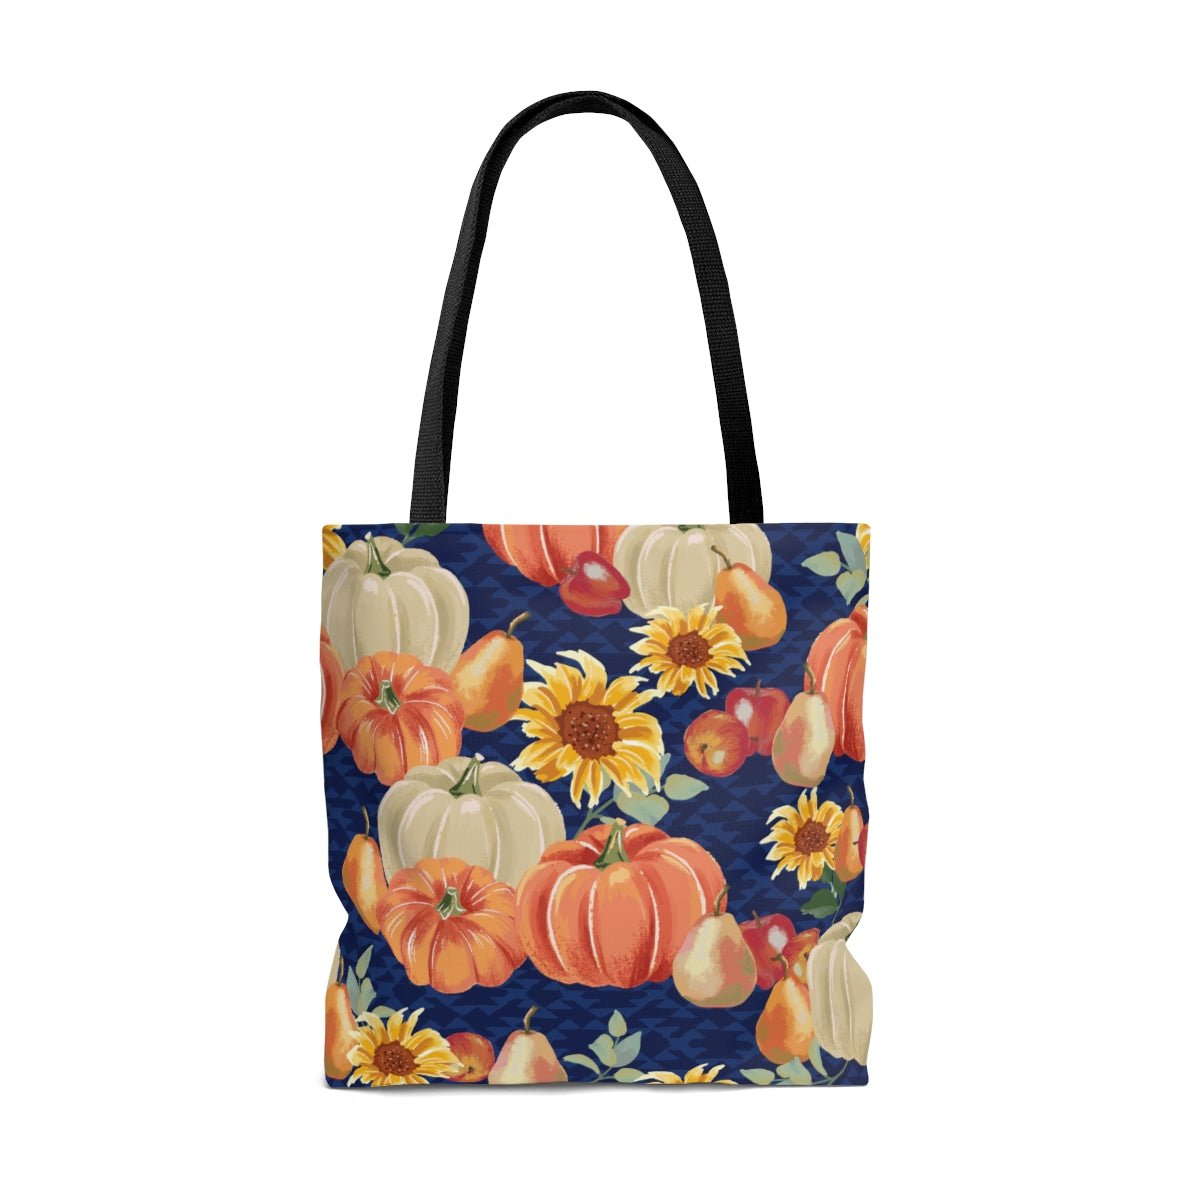 Fall Pumpkins and Sunflowers Tote Bag - Puffin Lime